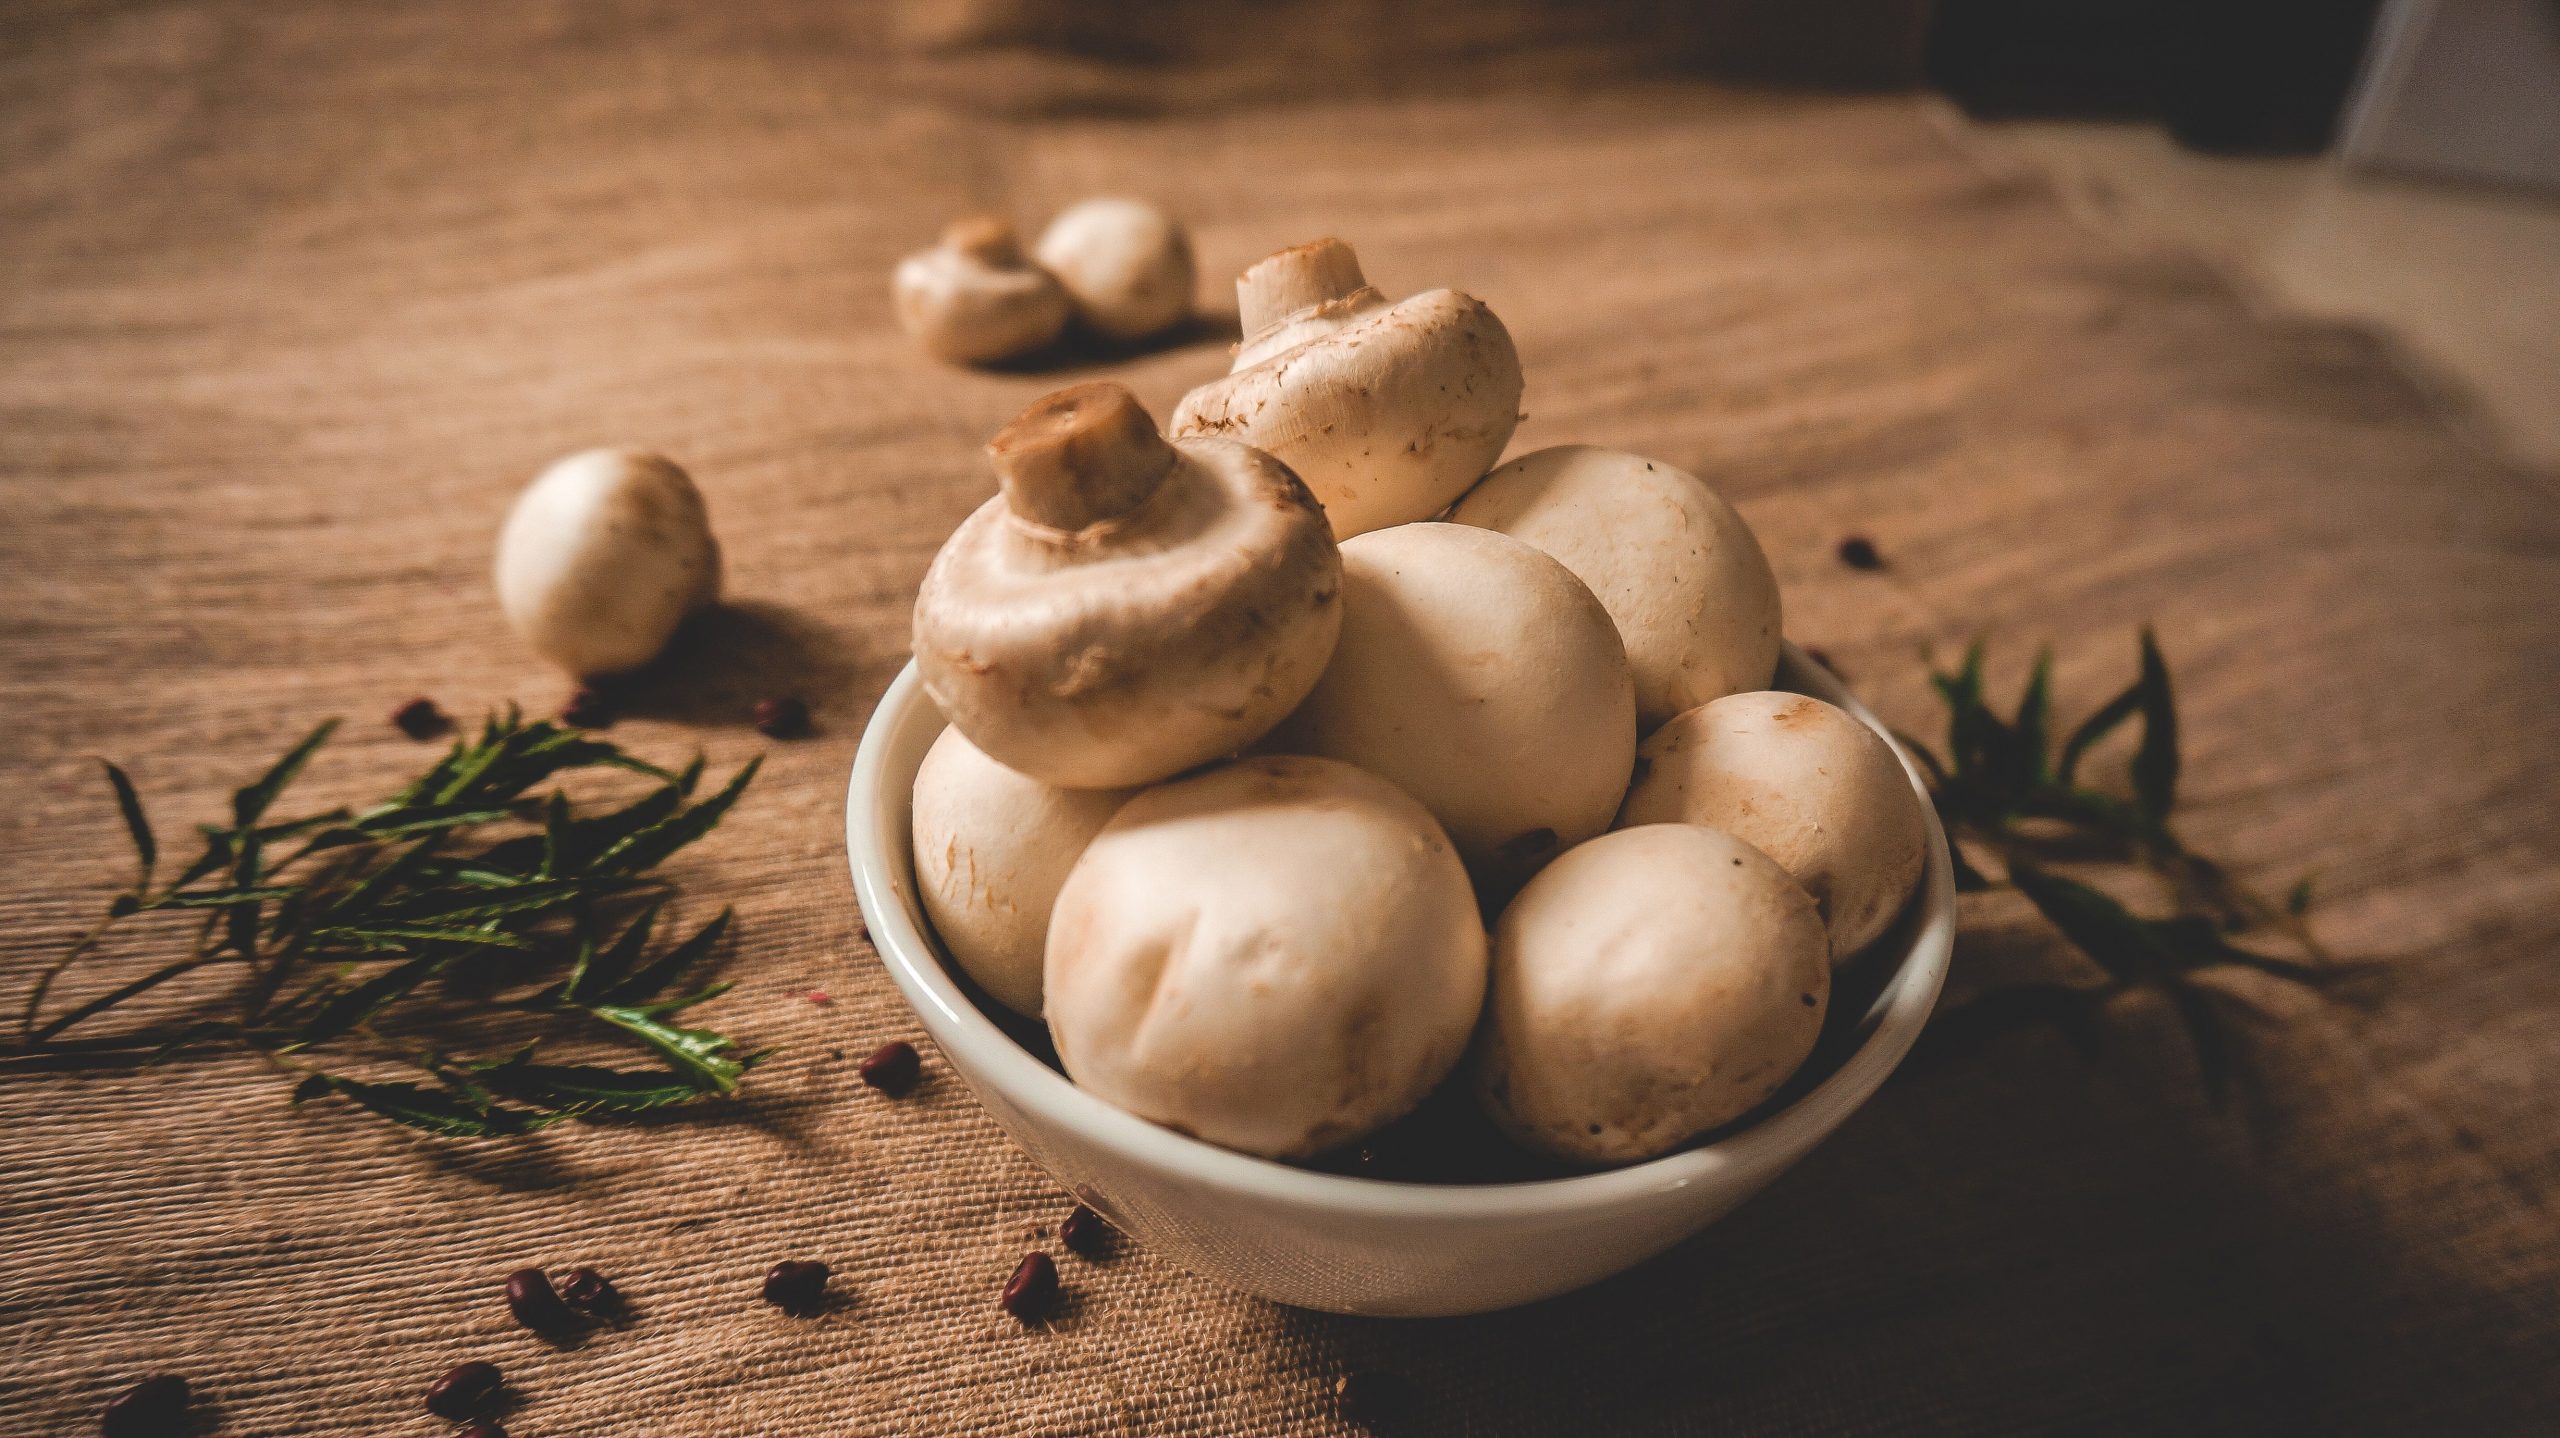 Make room for some mushrooms: A superfood and rich iron source